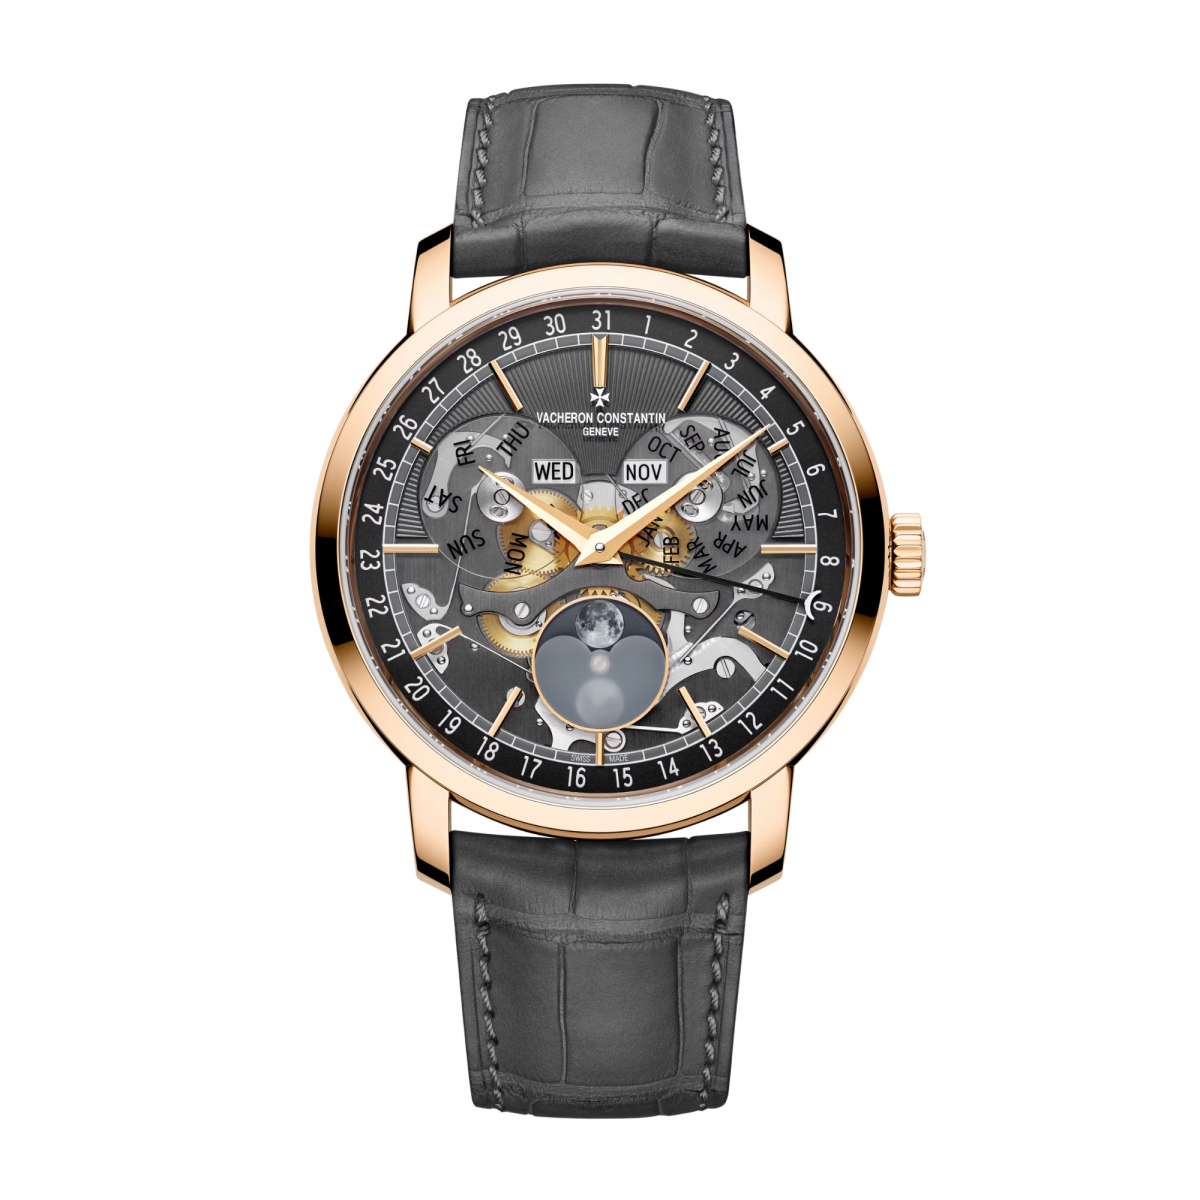 Traditionnelle 41 Complete Calendar Openface Rose Gold